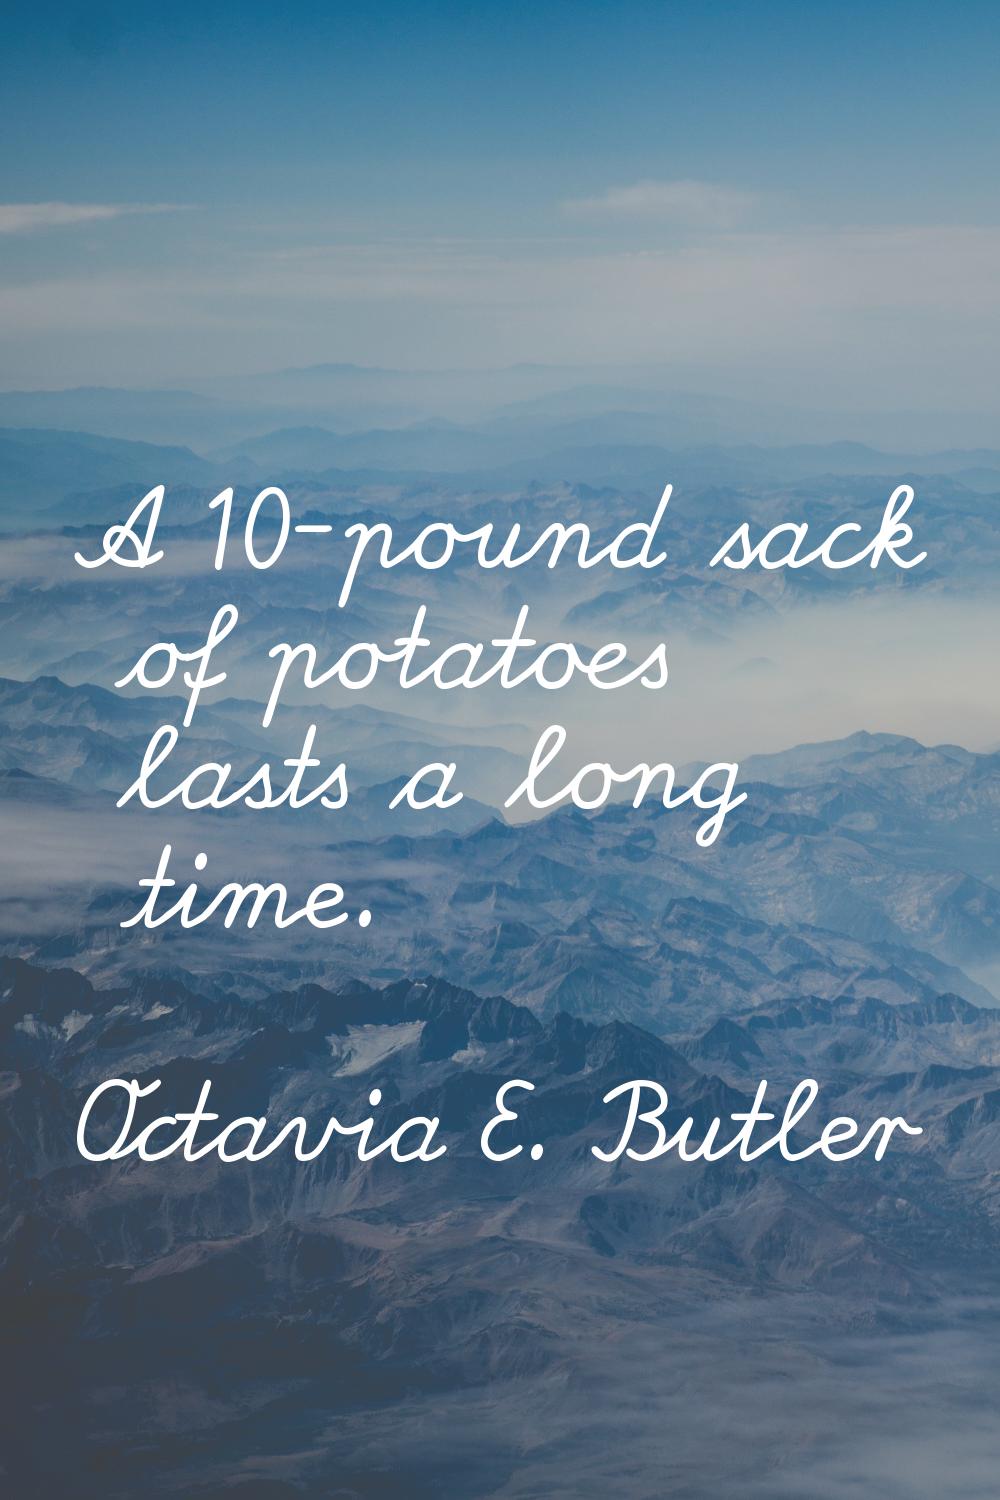 A 10-pound sack of potatoes lasts a long time.